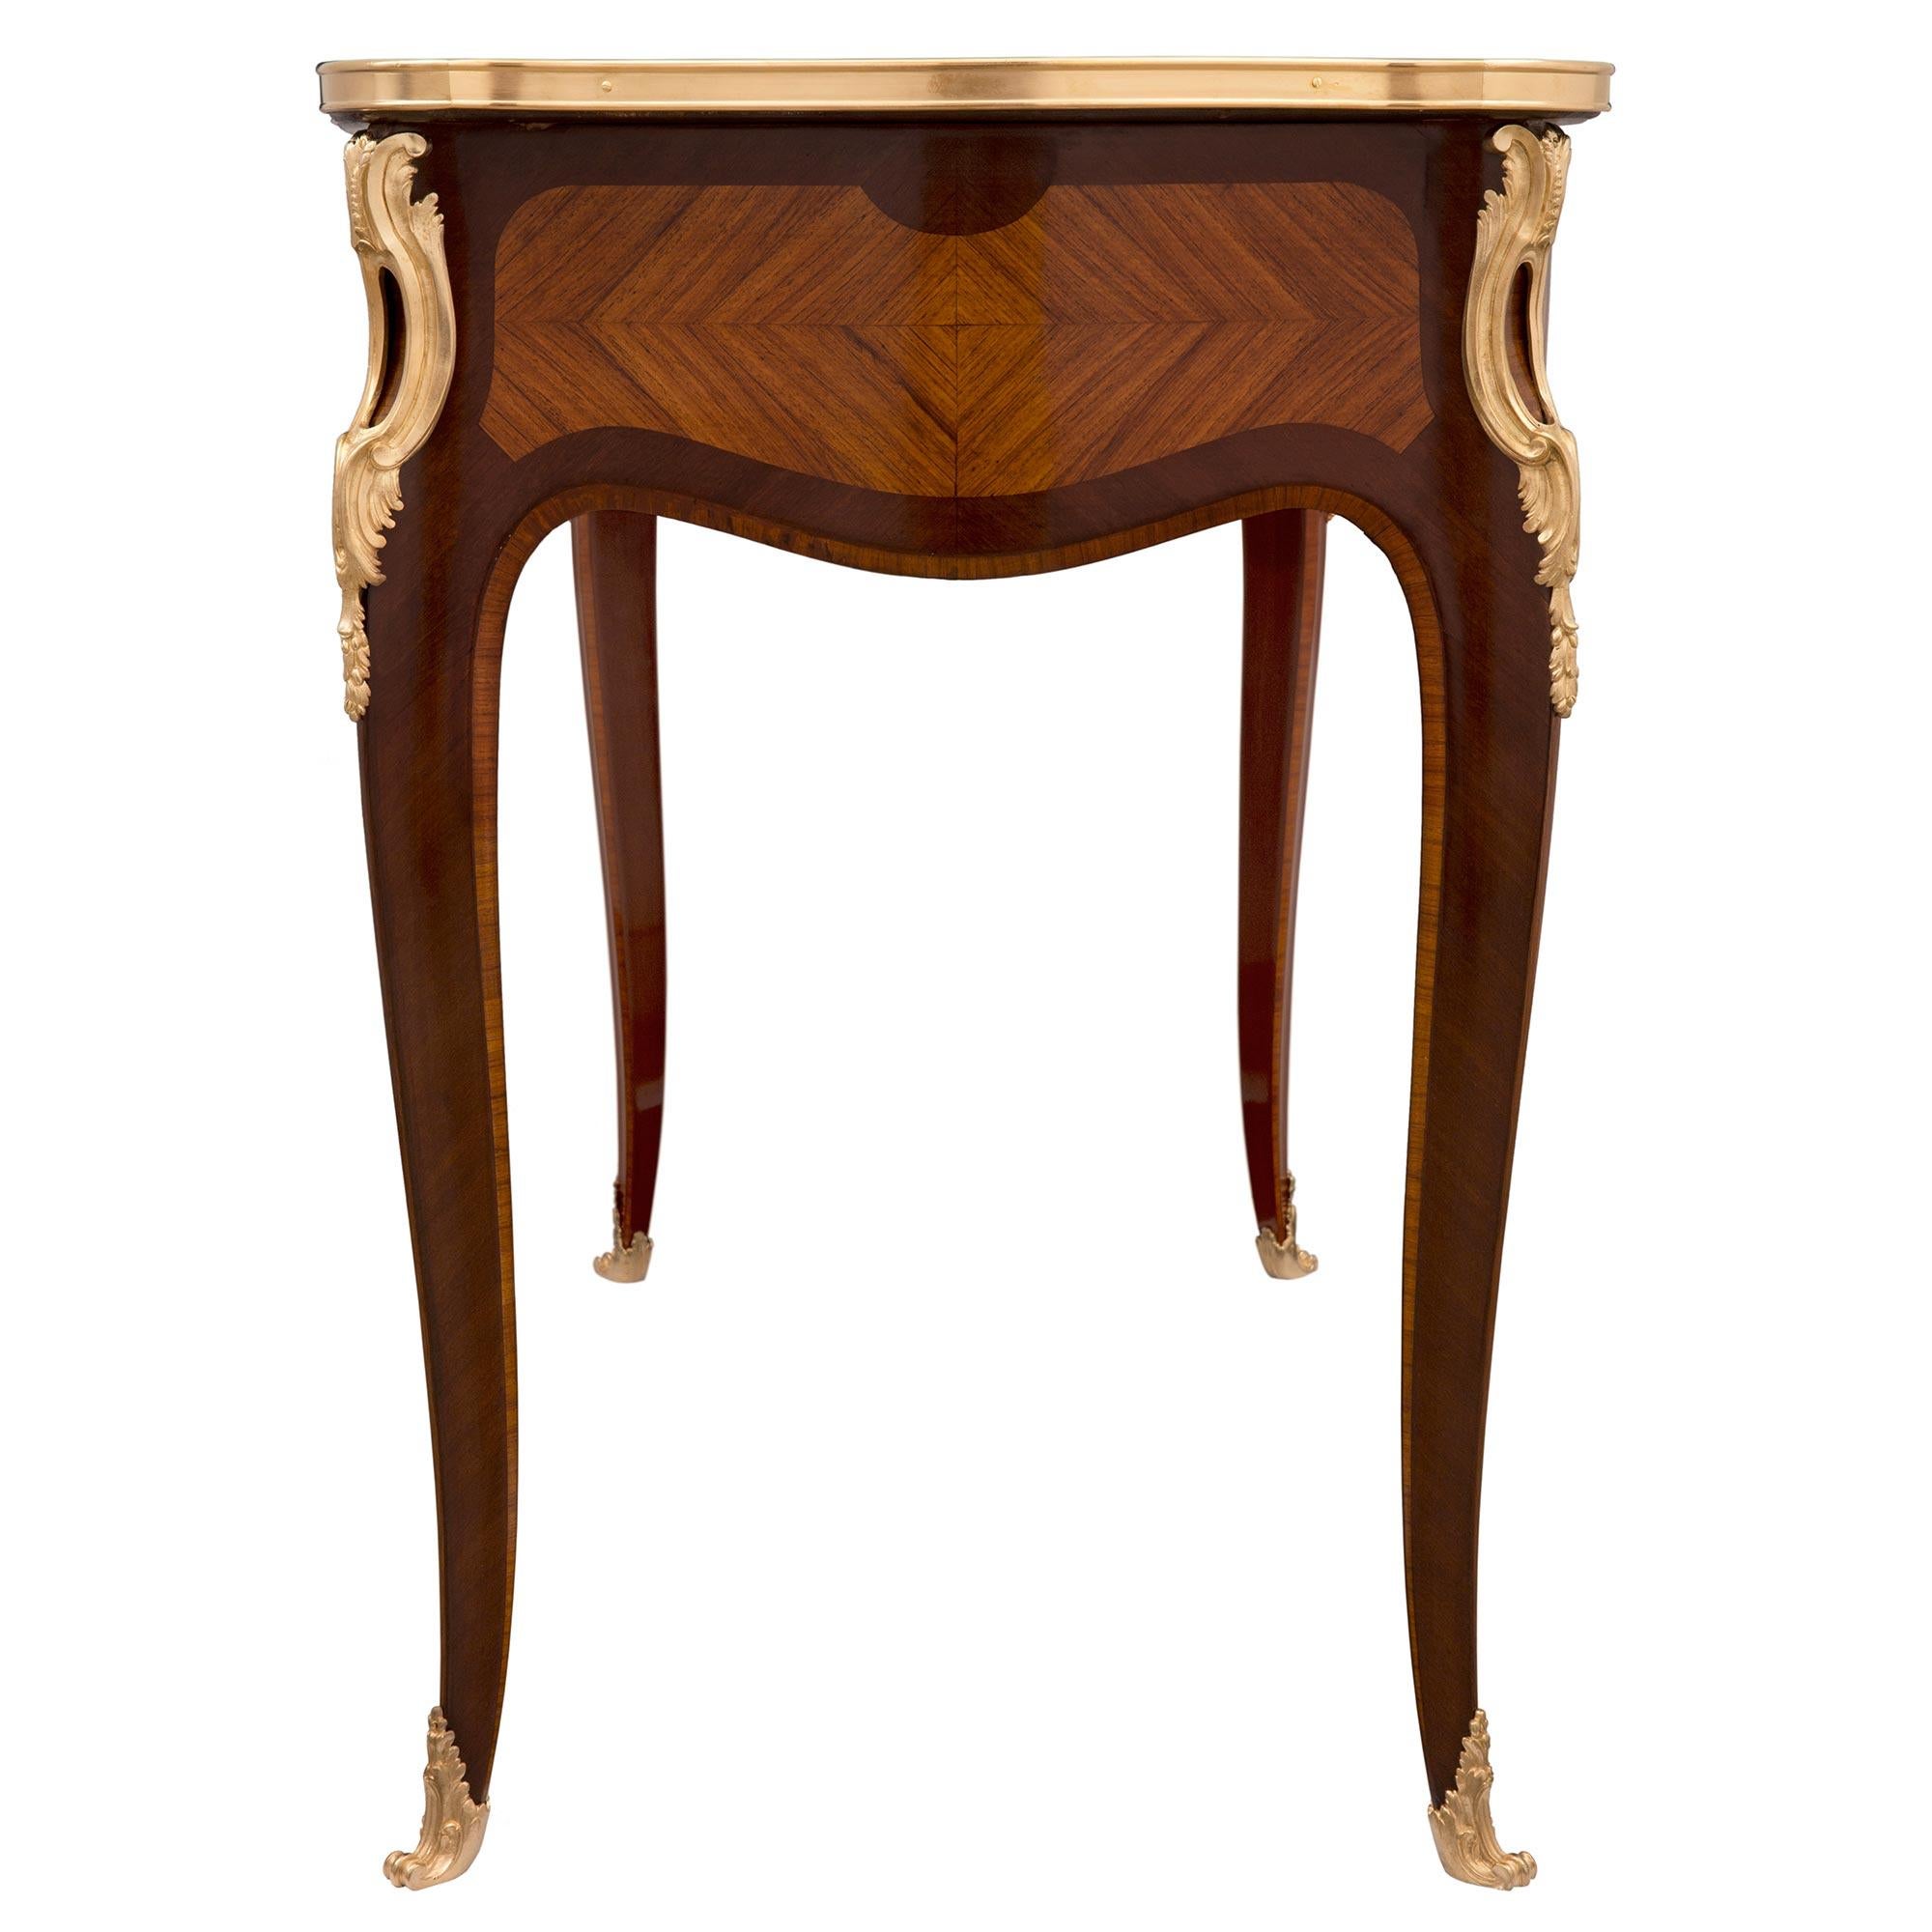 French 19th Century Louis XV St. Kingwood, Tulipwood and Ormolu Desk For Sale 2